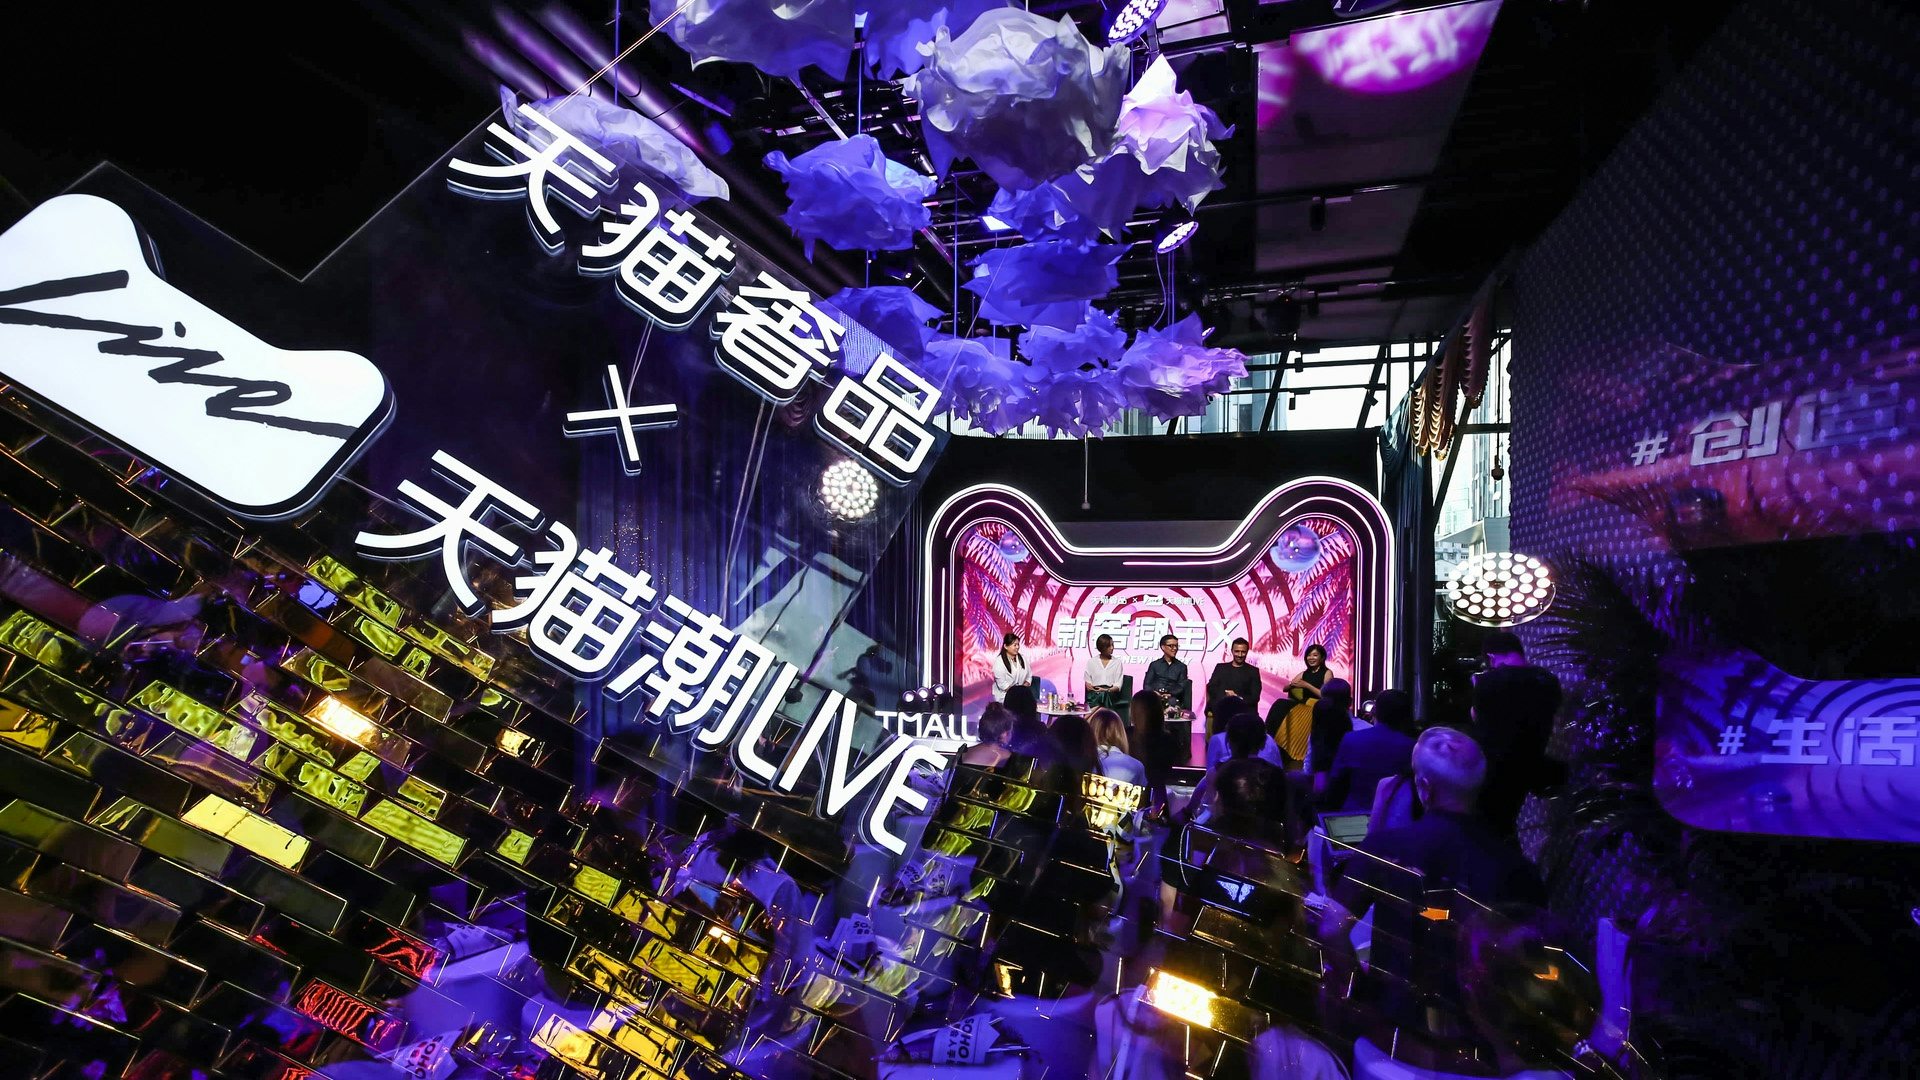 Alibaba’s internet browser has been removed from various Chinese app stores, an escalation of the conflict between Big Tech and Beijing. Photo: Courtesy of Tmall Luxury Pavilion/Business Wire